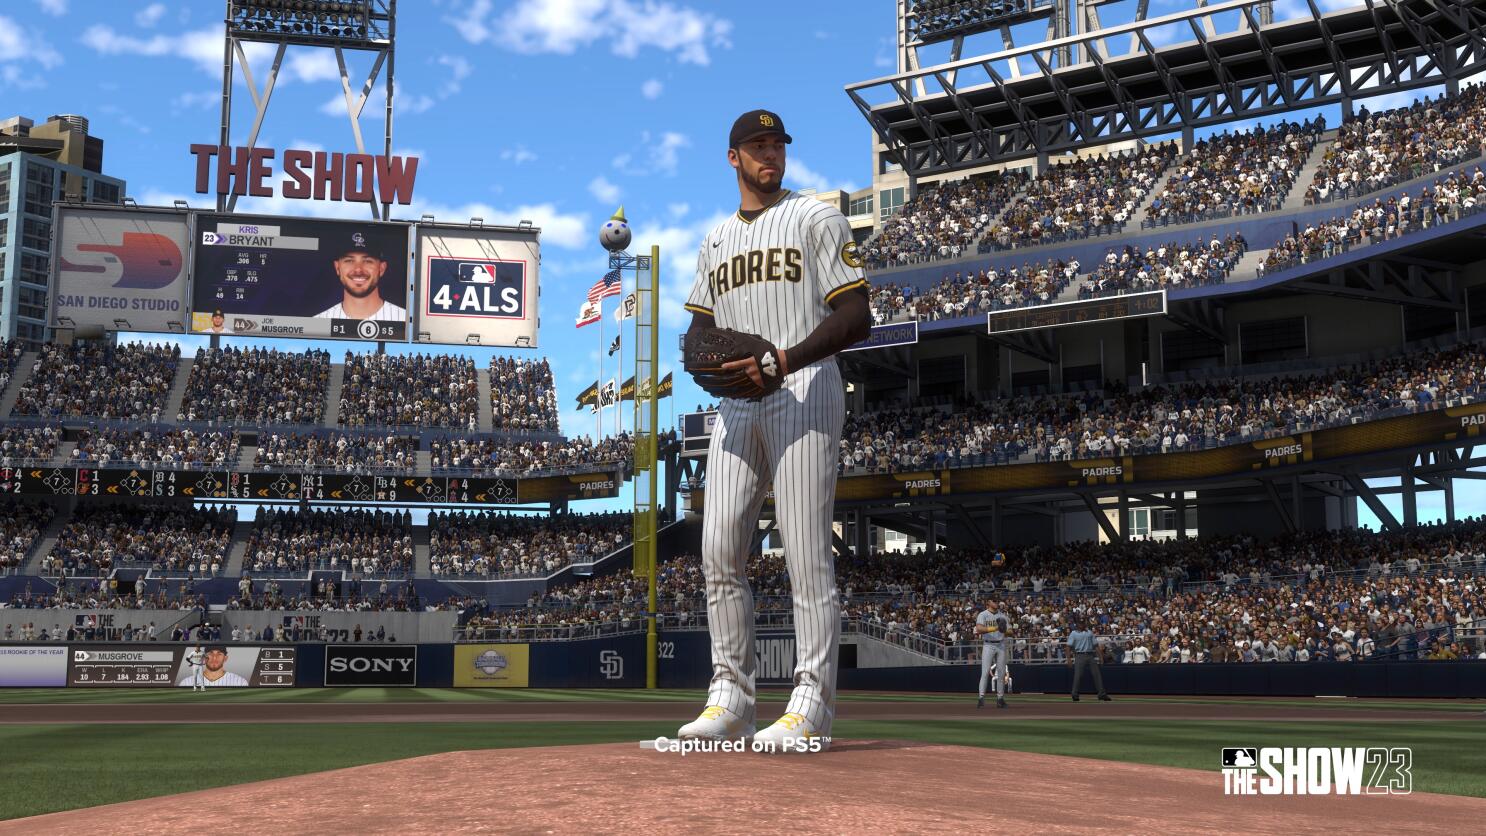 MLB The Show 22, Review